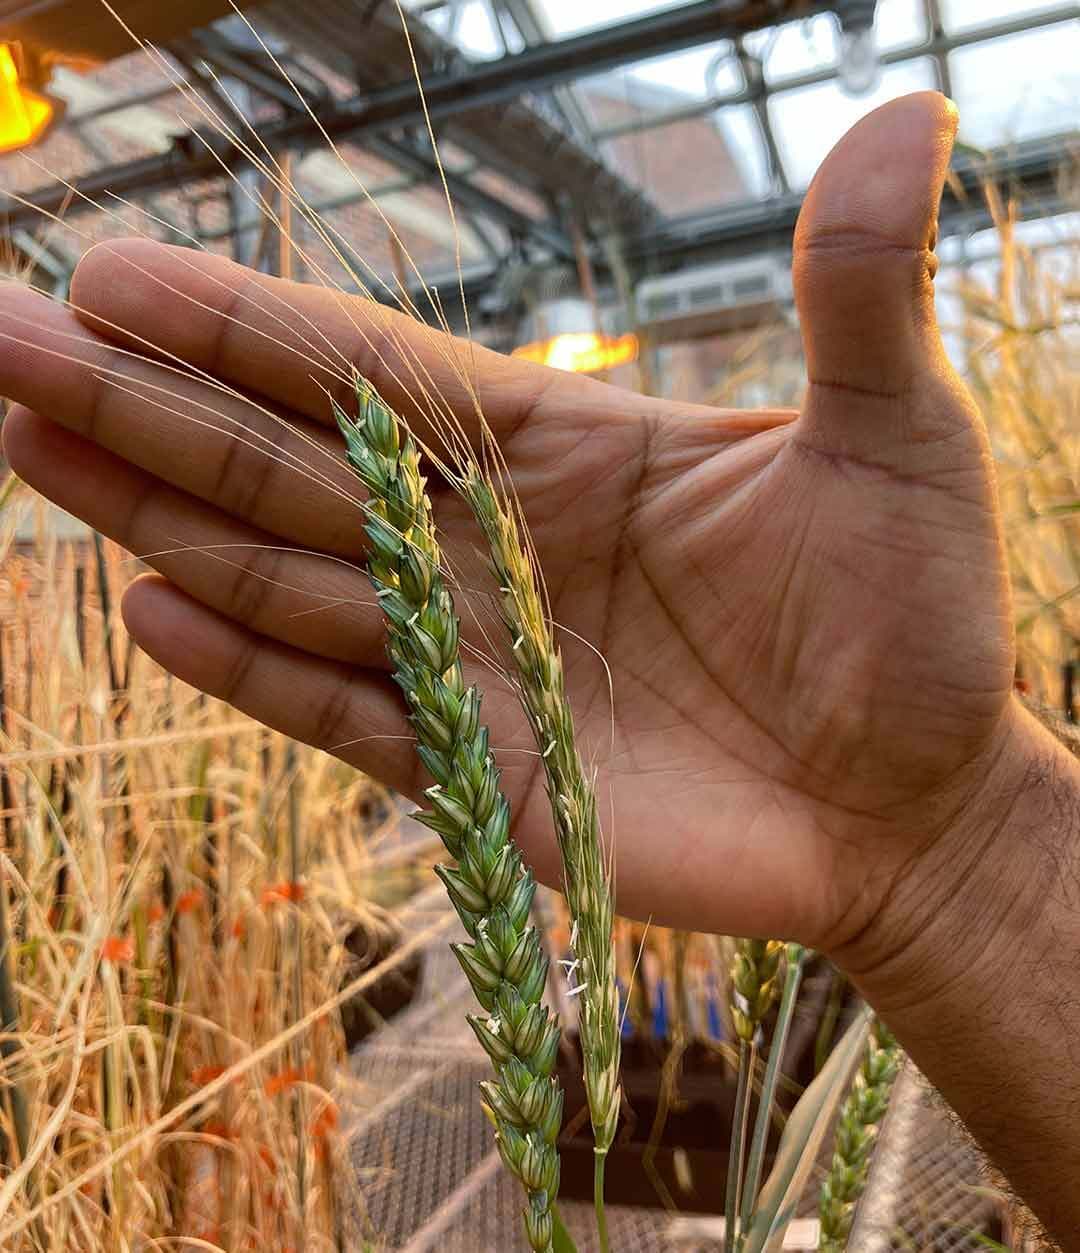 Hand showing one larger and one smaller stalk of wheat